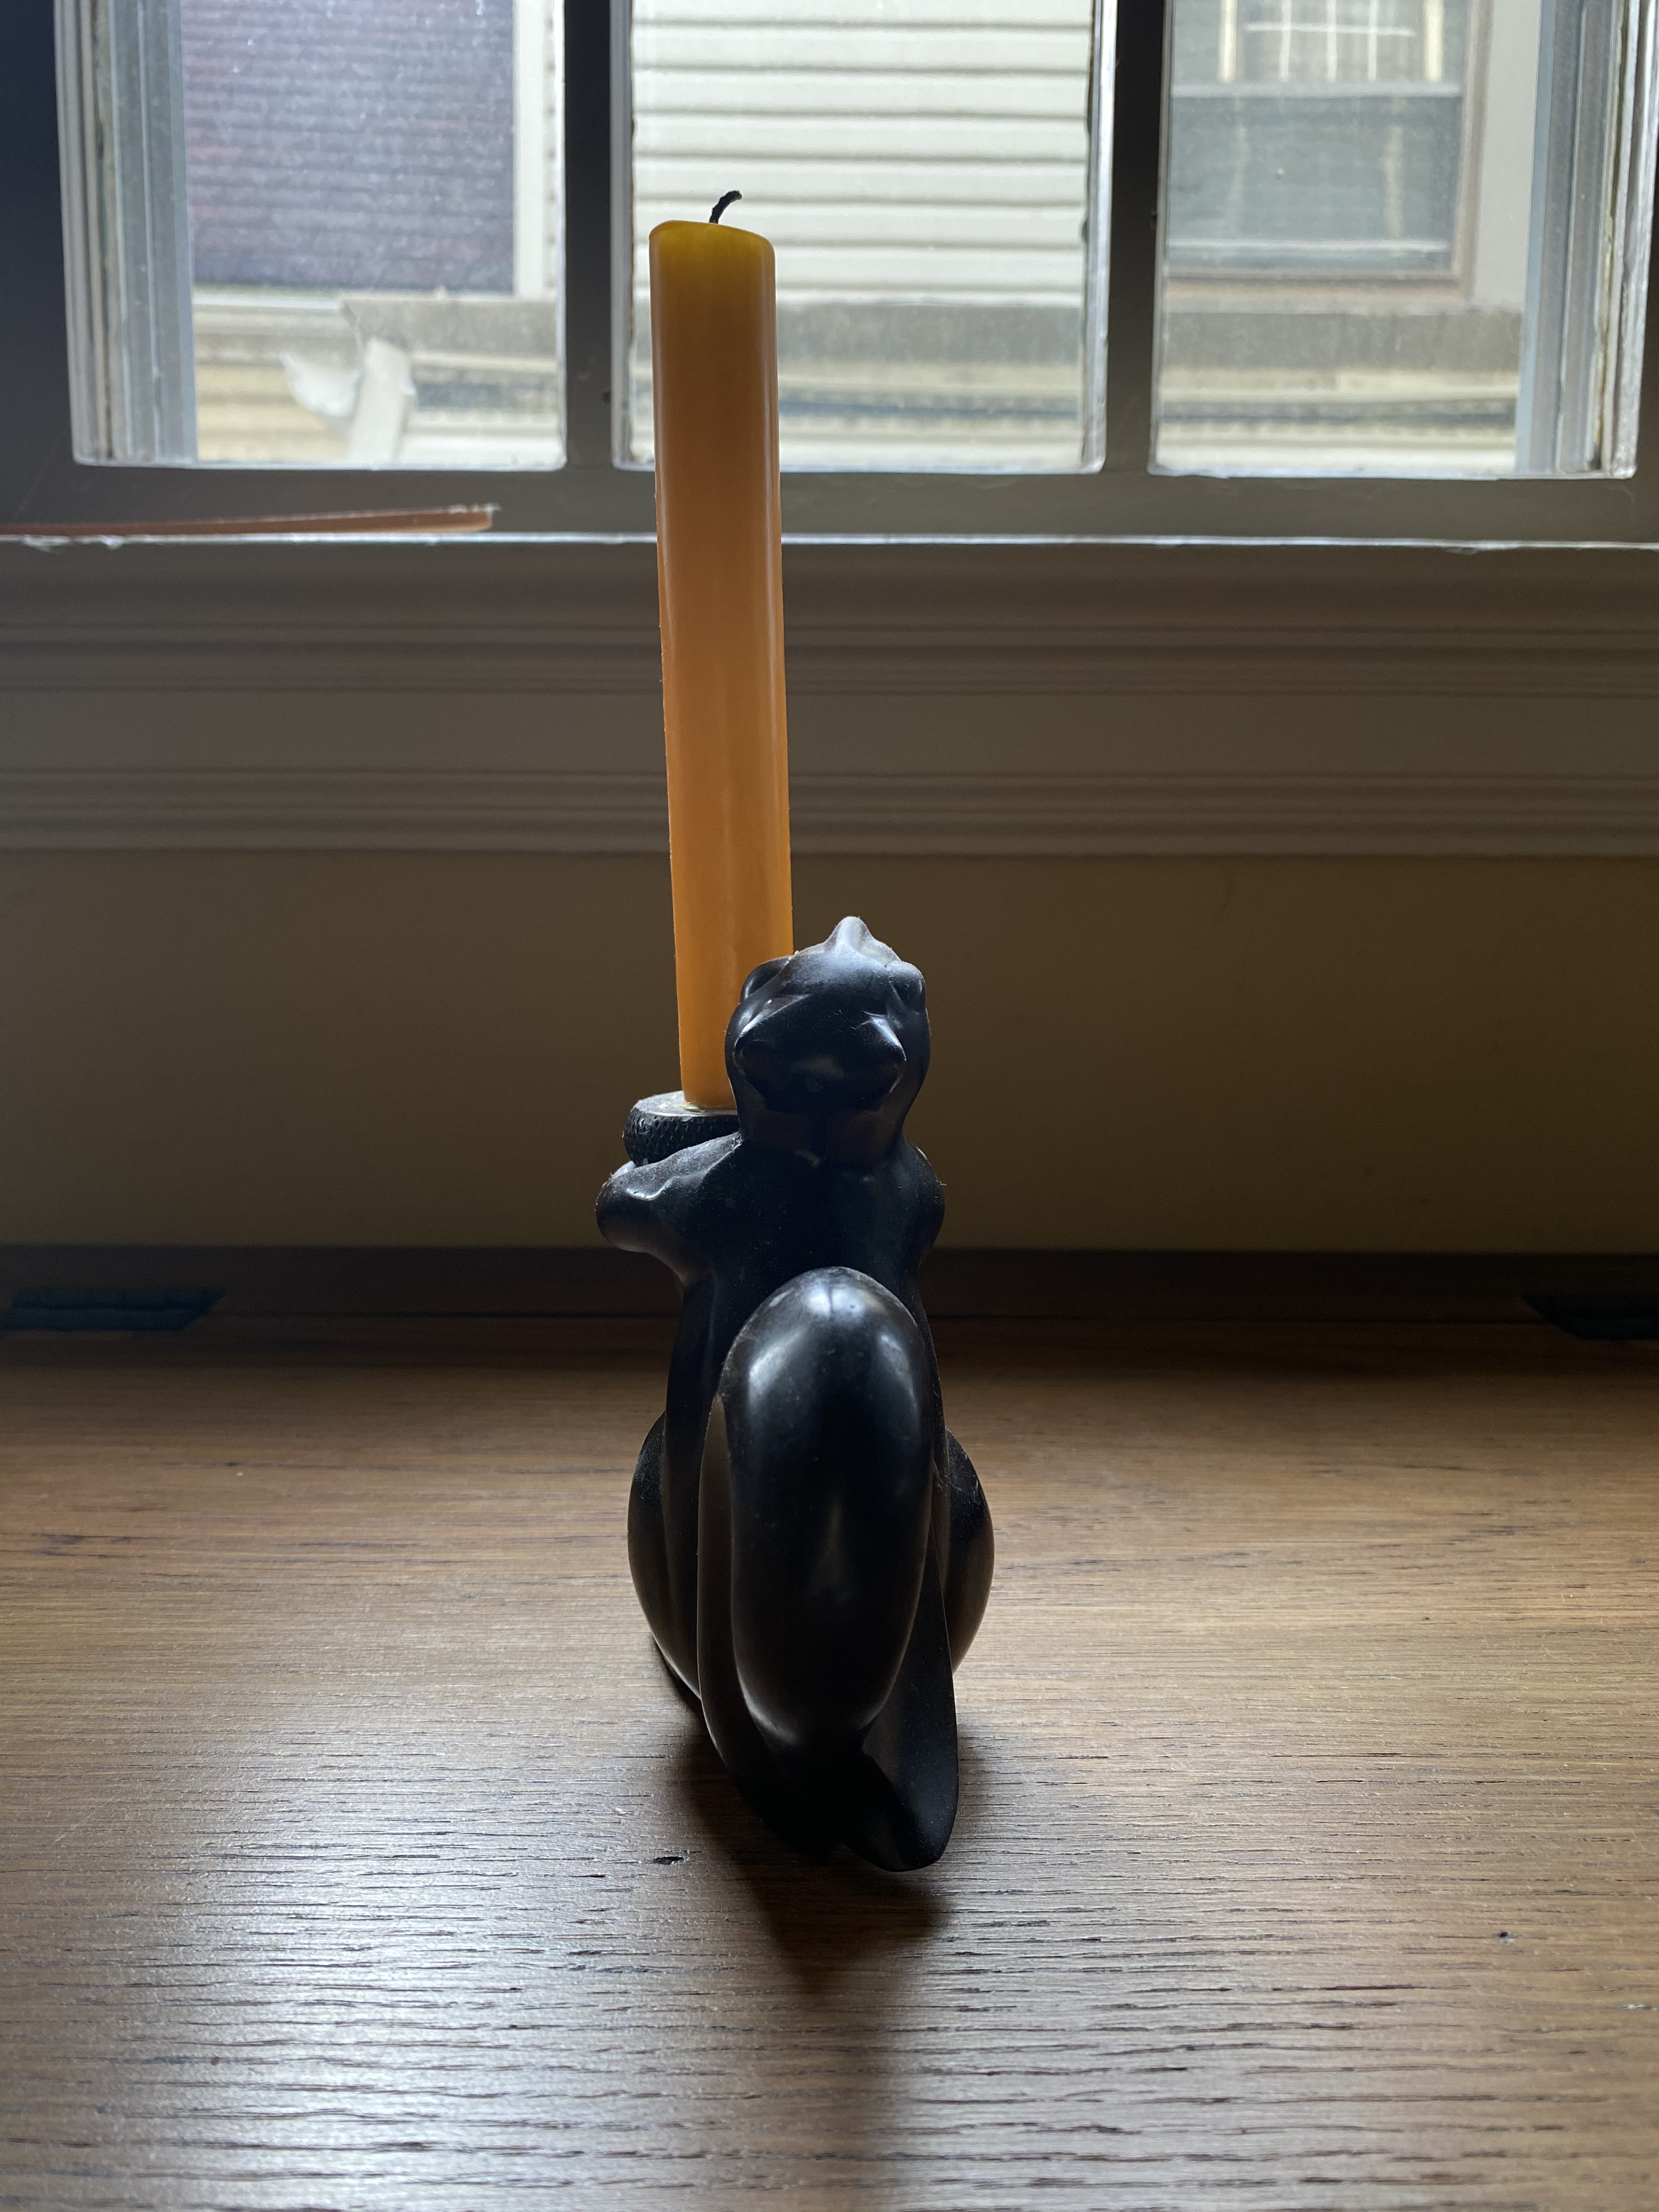 the back of the squirrel, the candle is much taller than the squirrel. taken from the top of the tail. the squirrel is very dusty